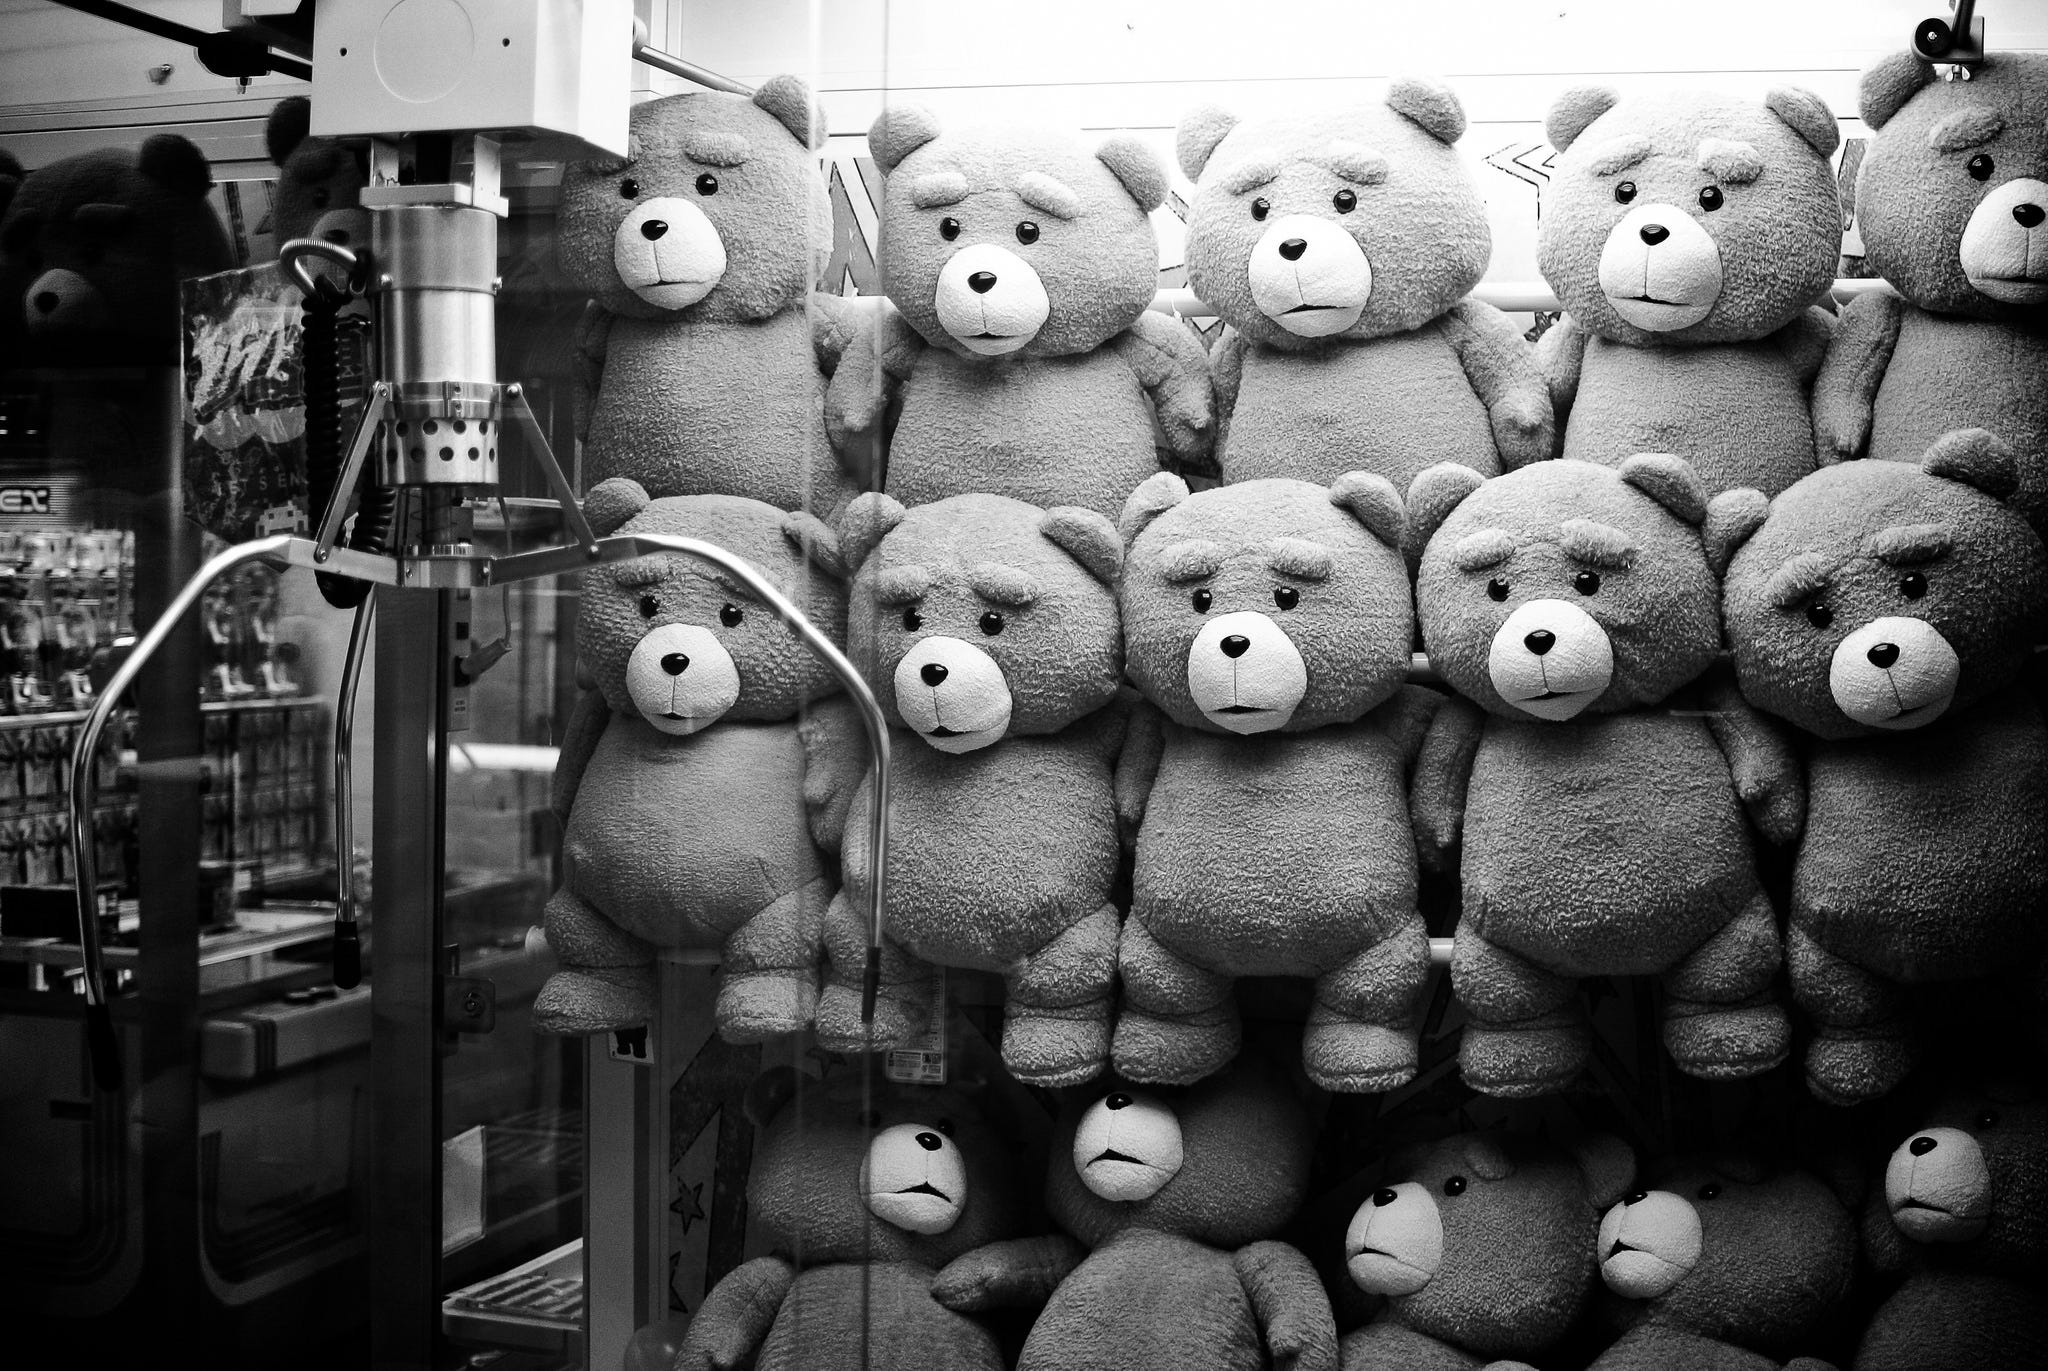 ted bear 1 and 2